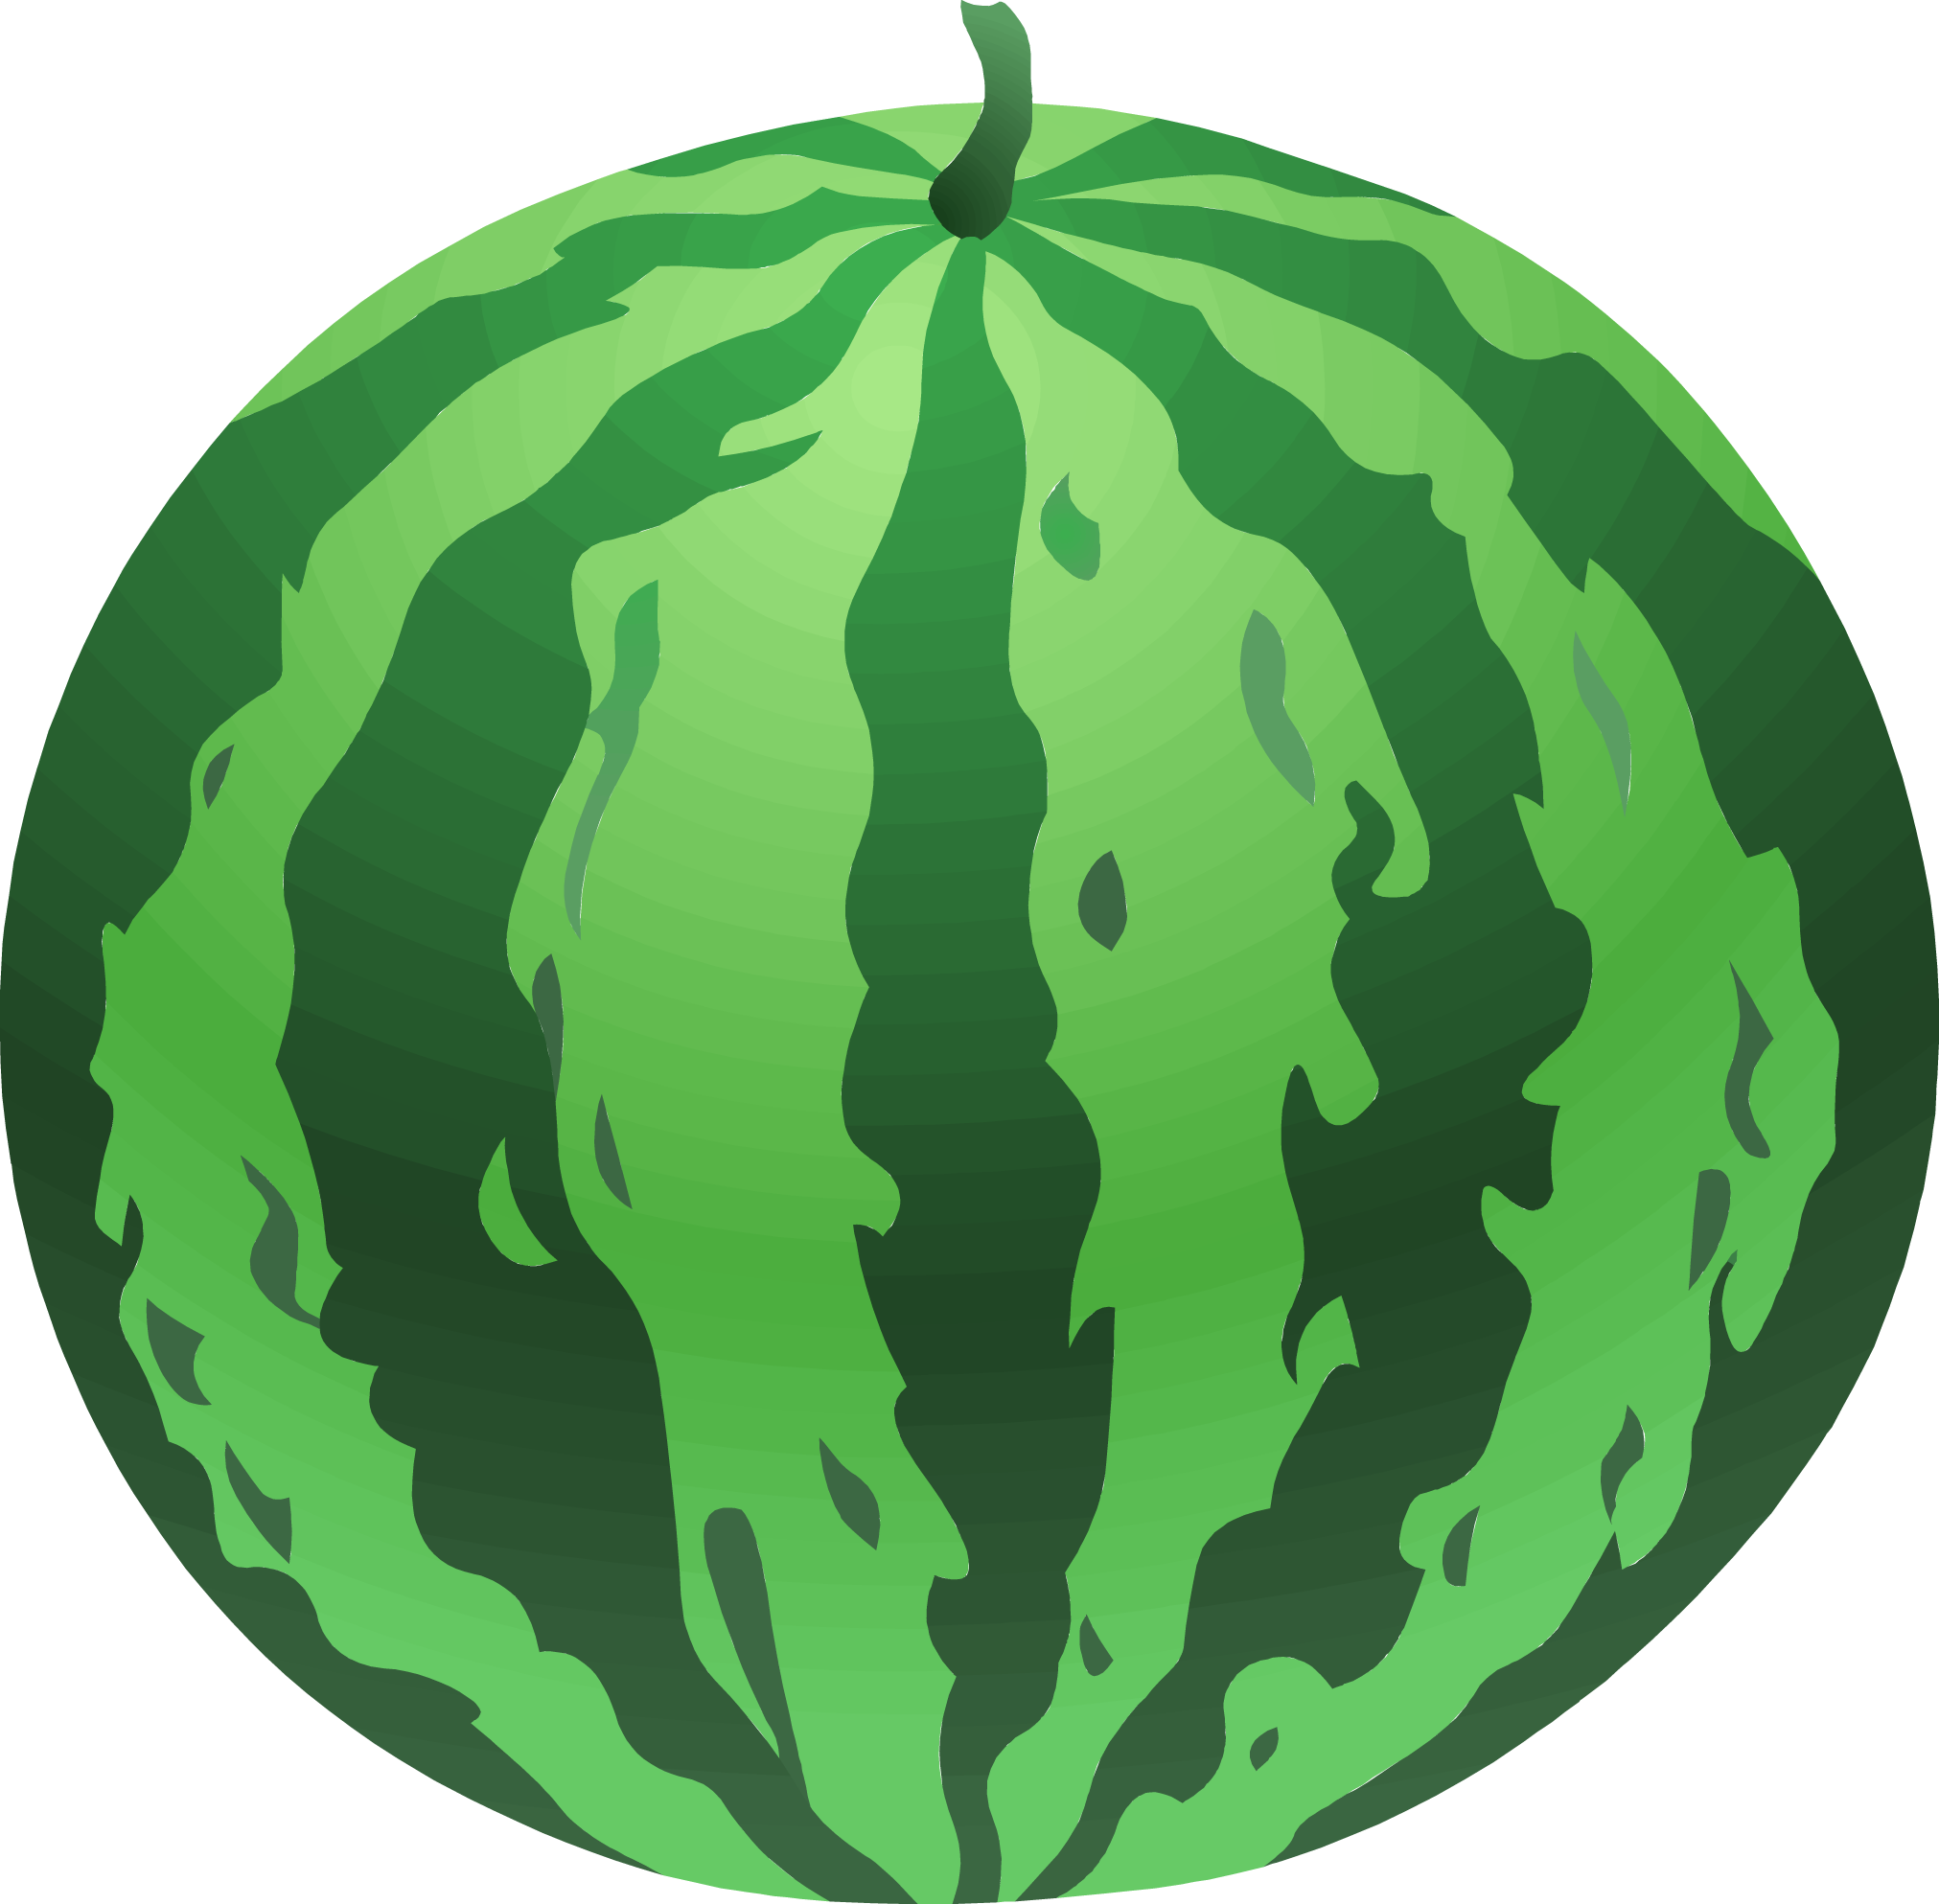 Watermelon images free . - Watermelon Clipart